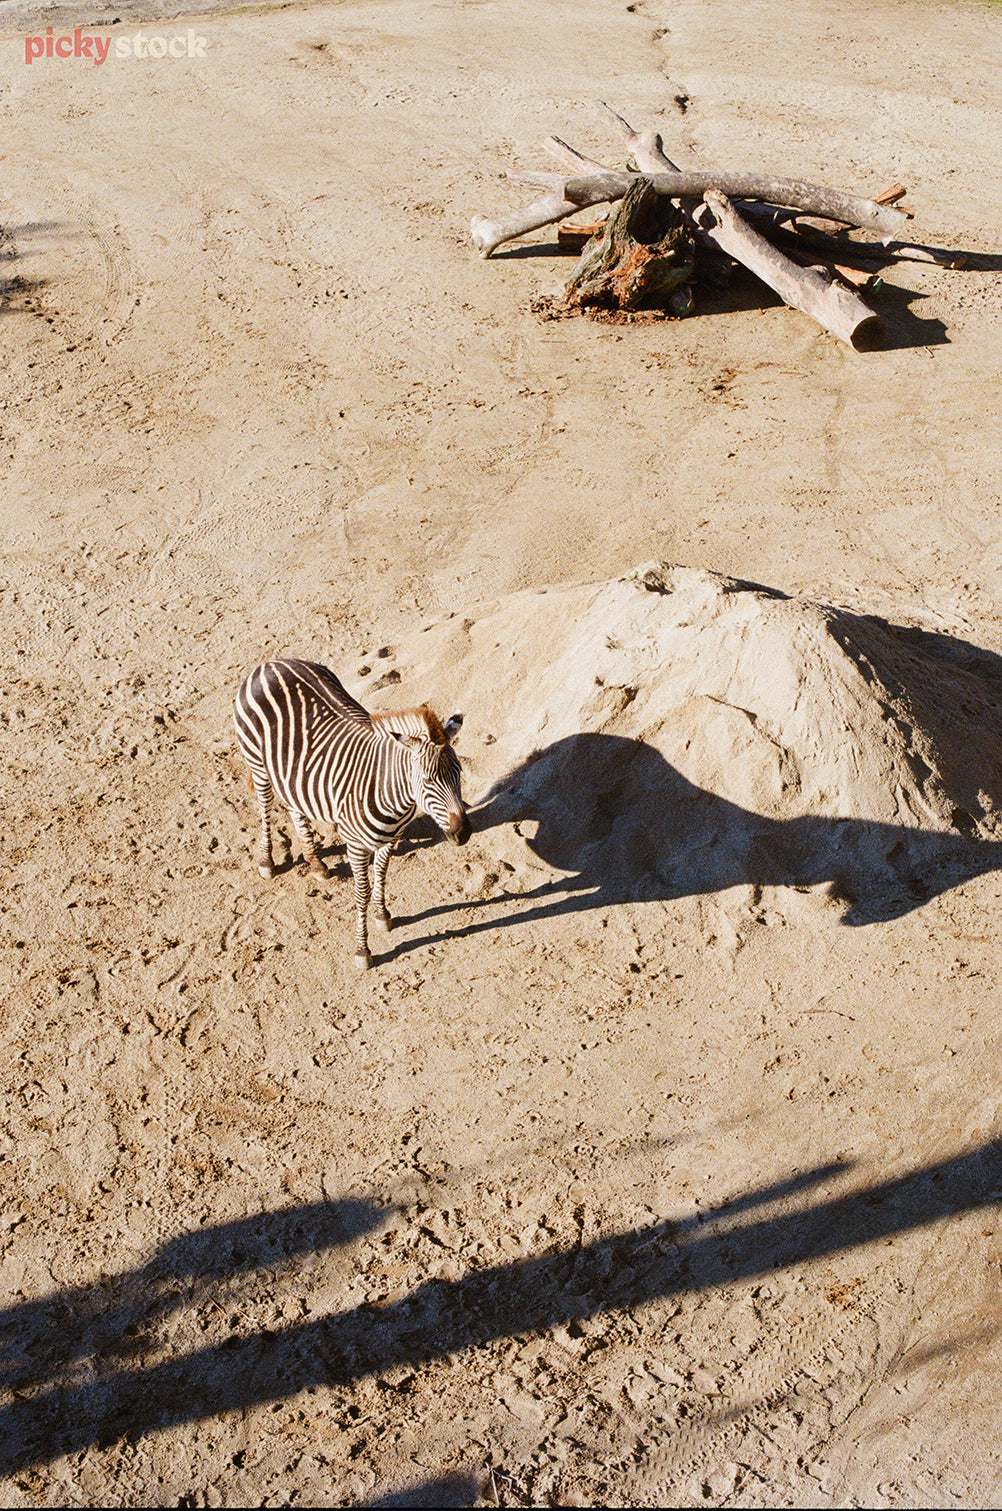 Looking down from a platform to a zebra in a zoo. The enclosure is pretty simplistic, with hard mud ground.